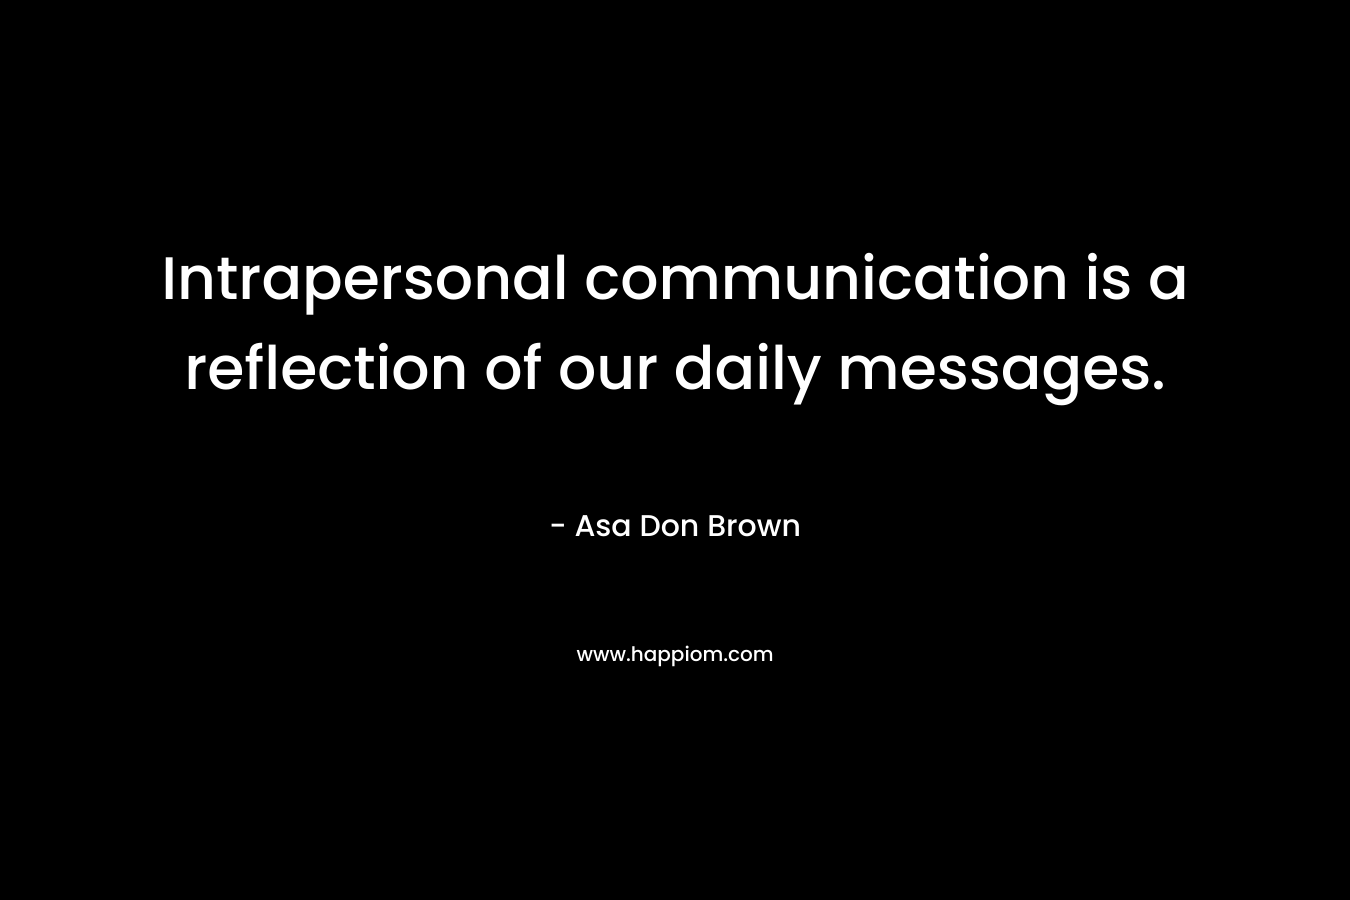 Intrapersonal communication is a reflection of our daily messages. – Asa Don Brown